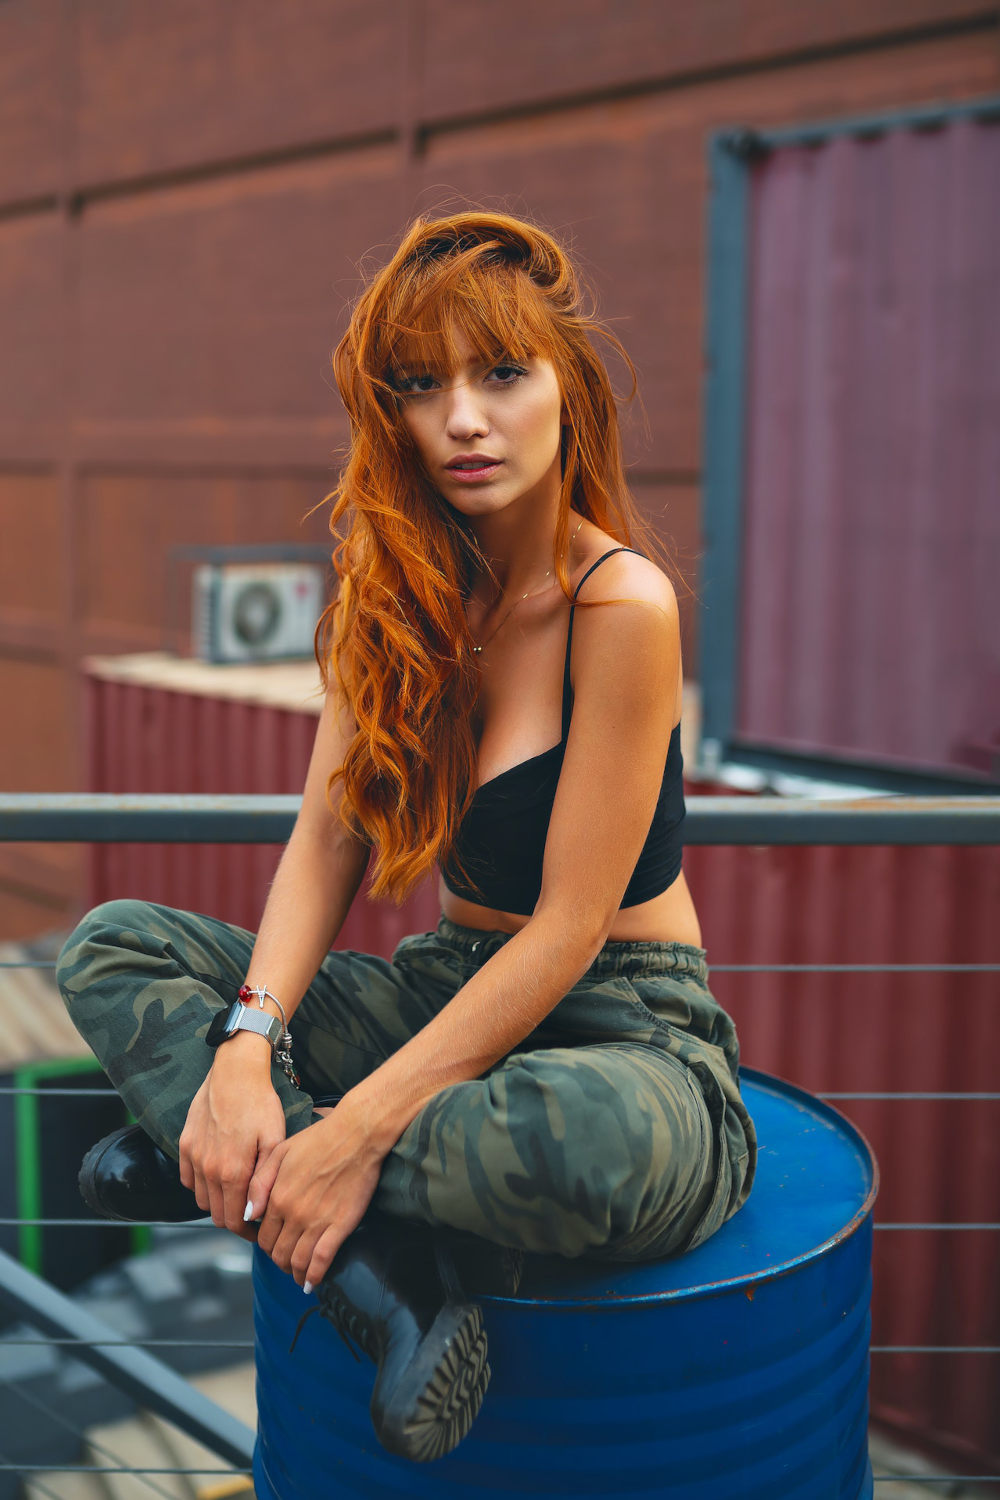 Girl sitting on barrel wearing camouflage military-style pants